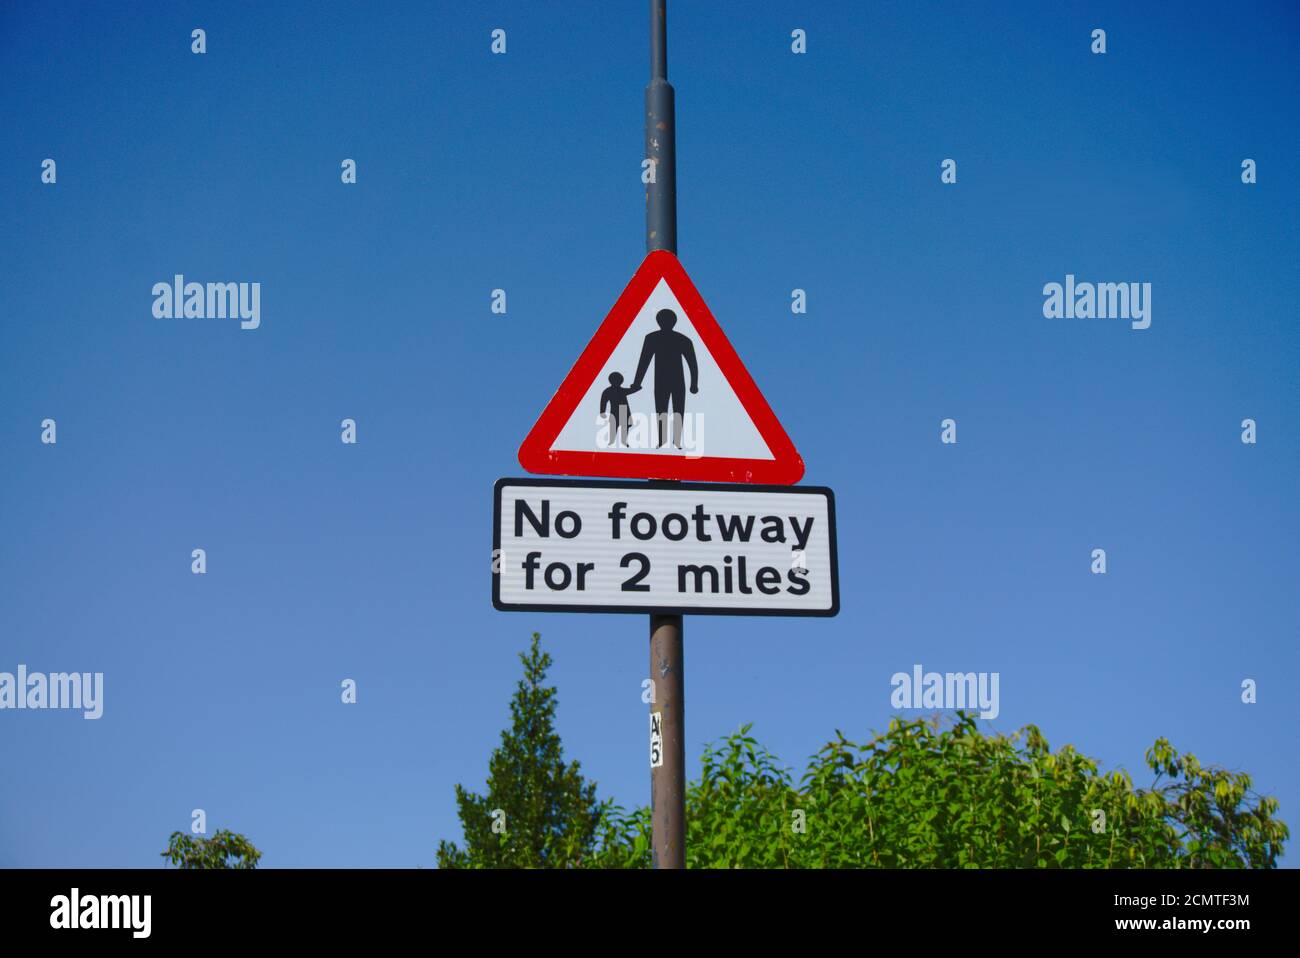 Road sign in Midlothian, Scotland, UK, warning of no footway for two miles. Stock Photo